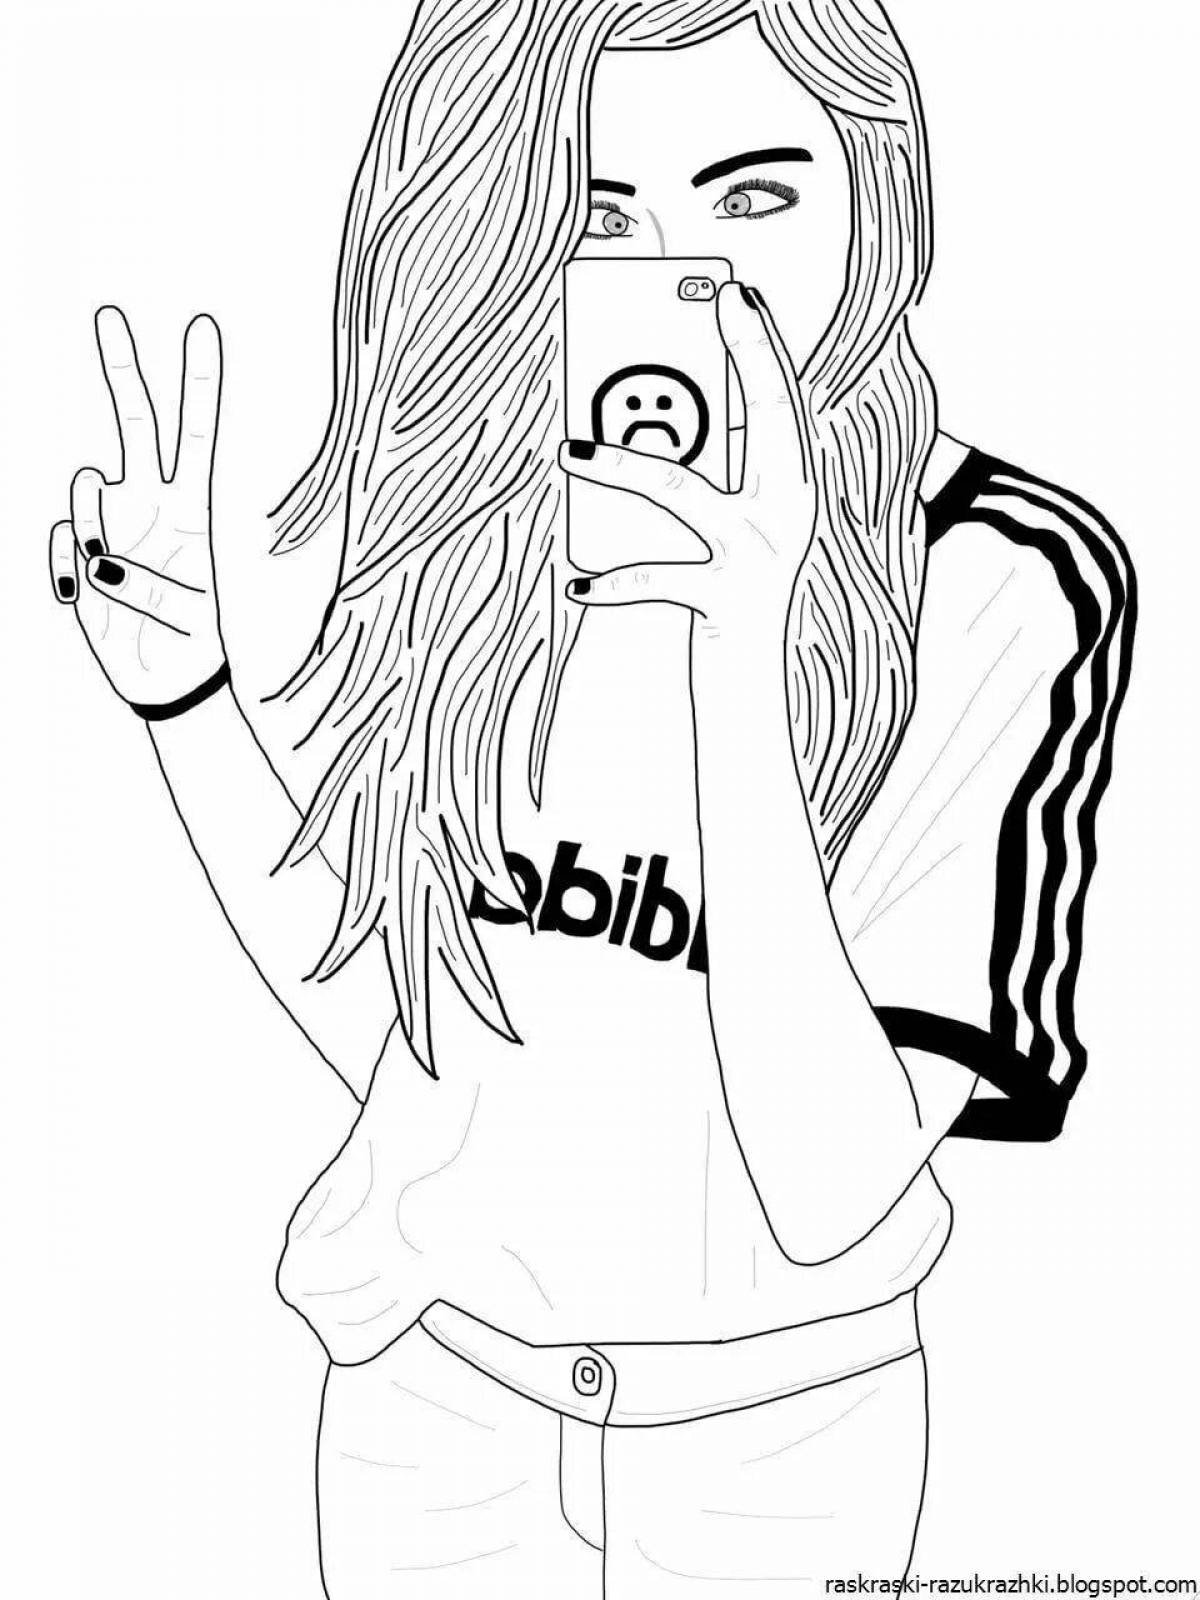 Color-vibrant coloring page 16-17 years old